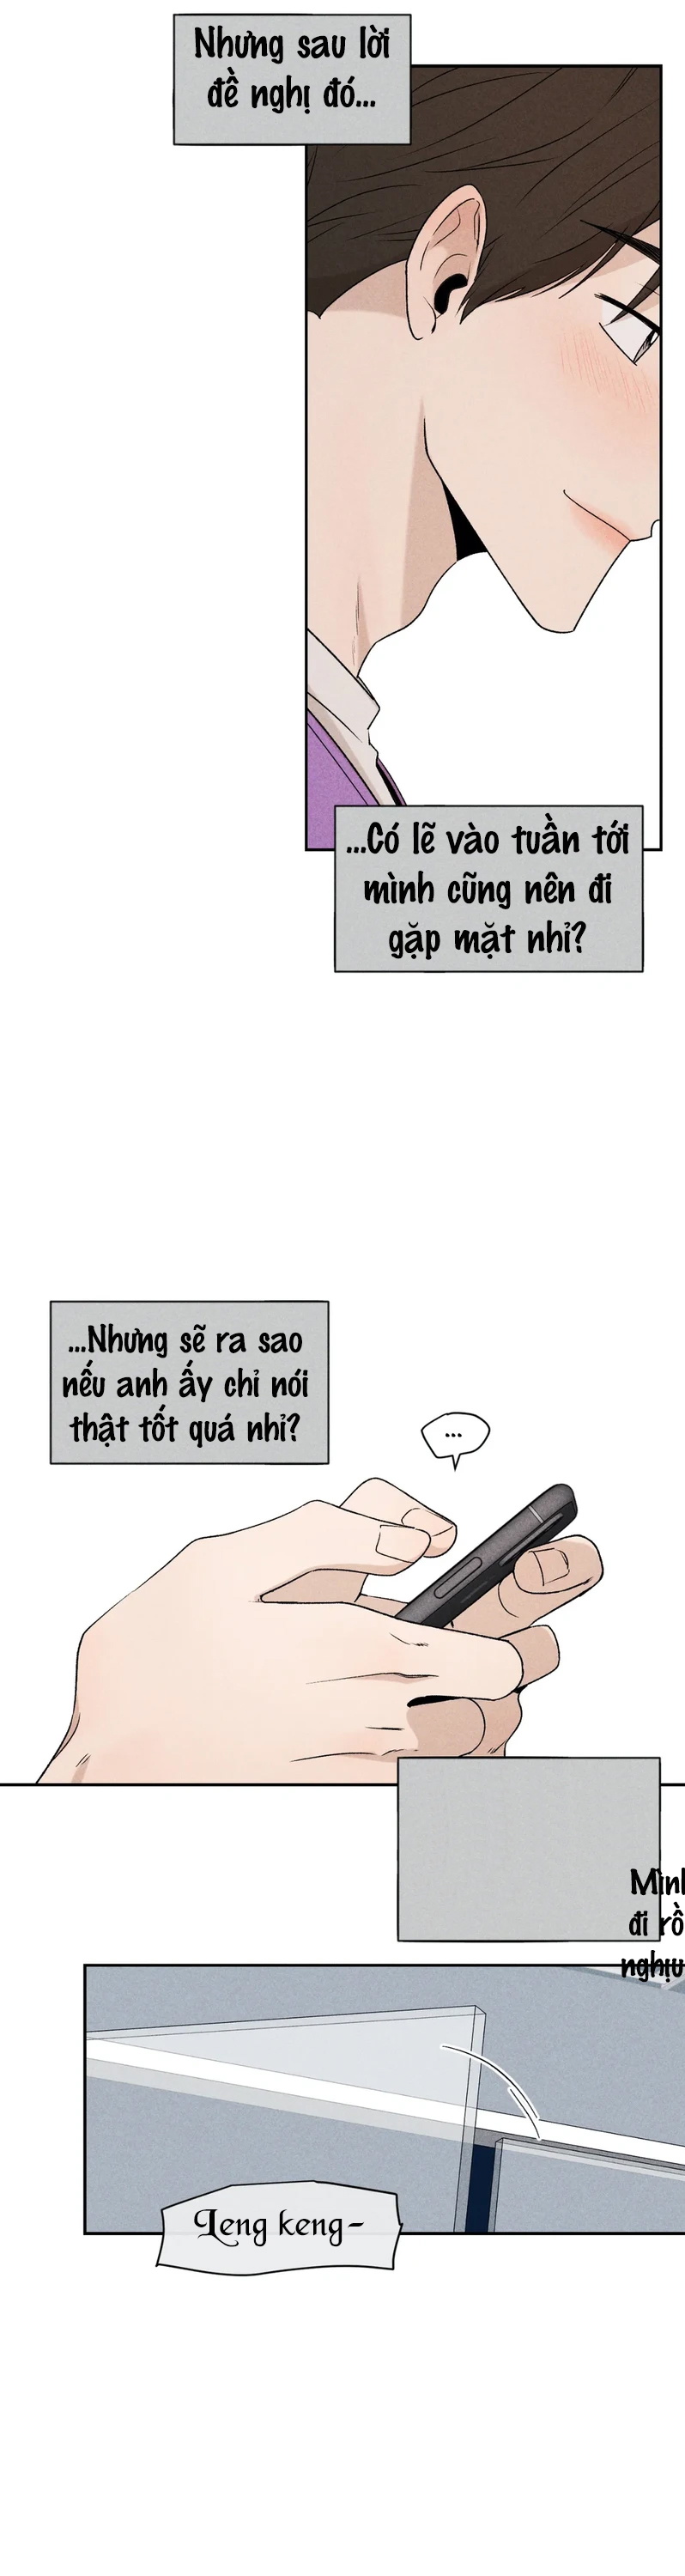 dung-cho-toi-hy-vong-chap-4-22